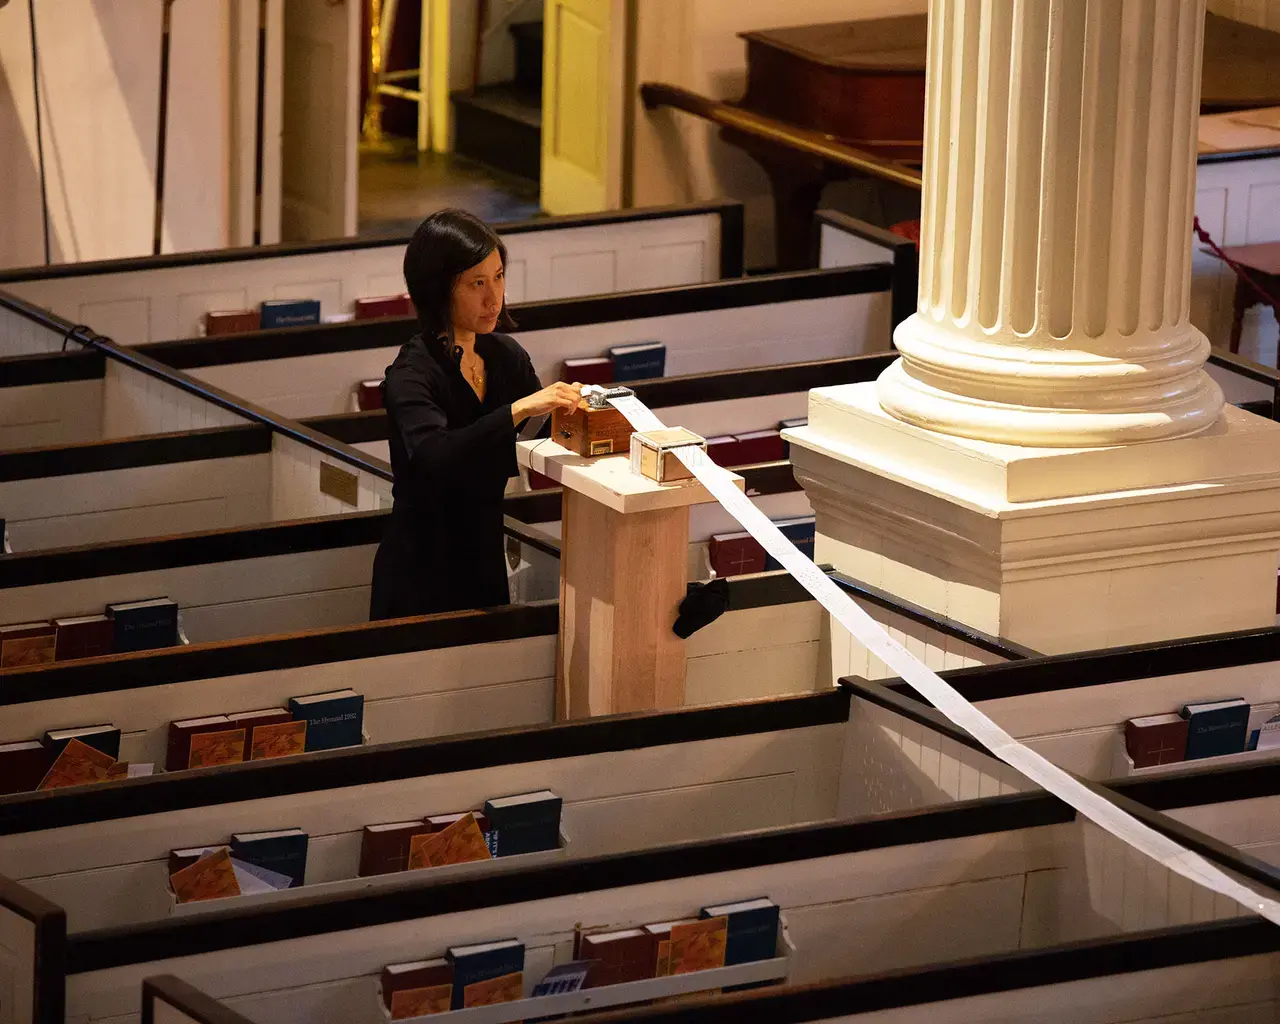 Composer Phyllis Chen of International Contemporary Ensemble performs at the world premiere of In Plain Air at Christ Church, September 2018. Photo by Plate 3 Photography.